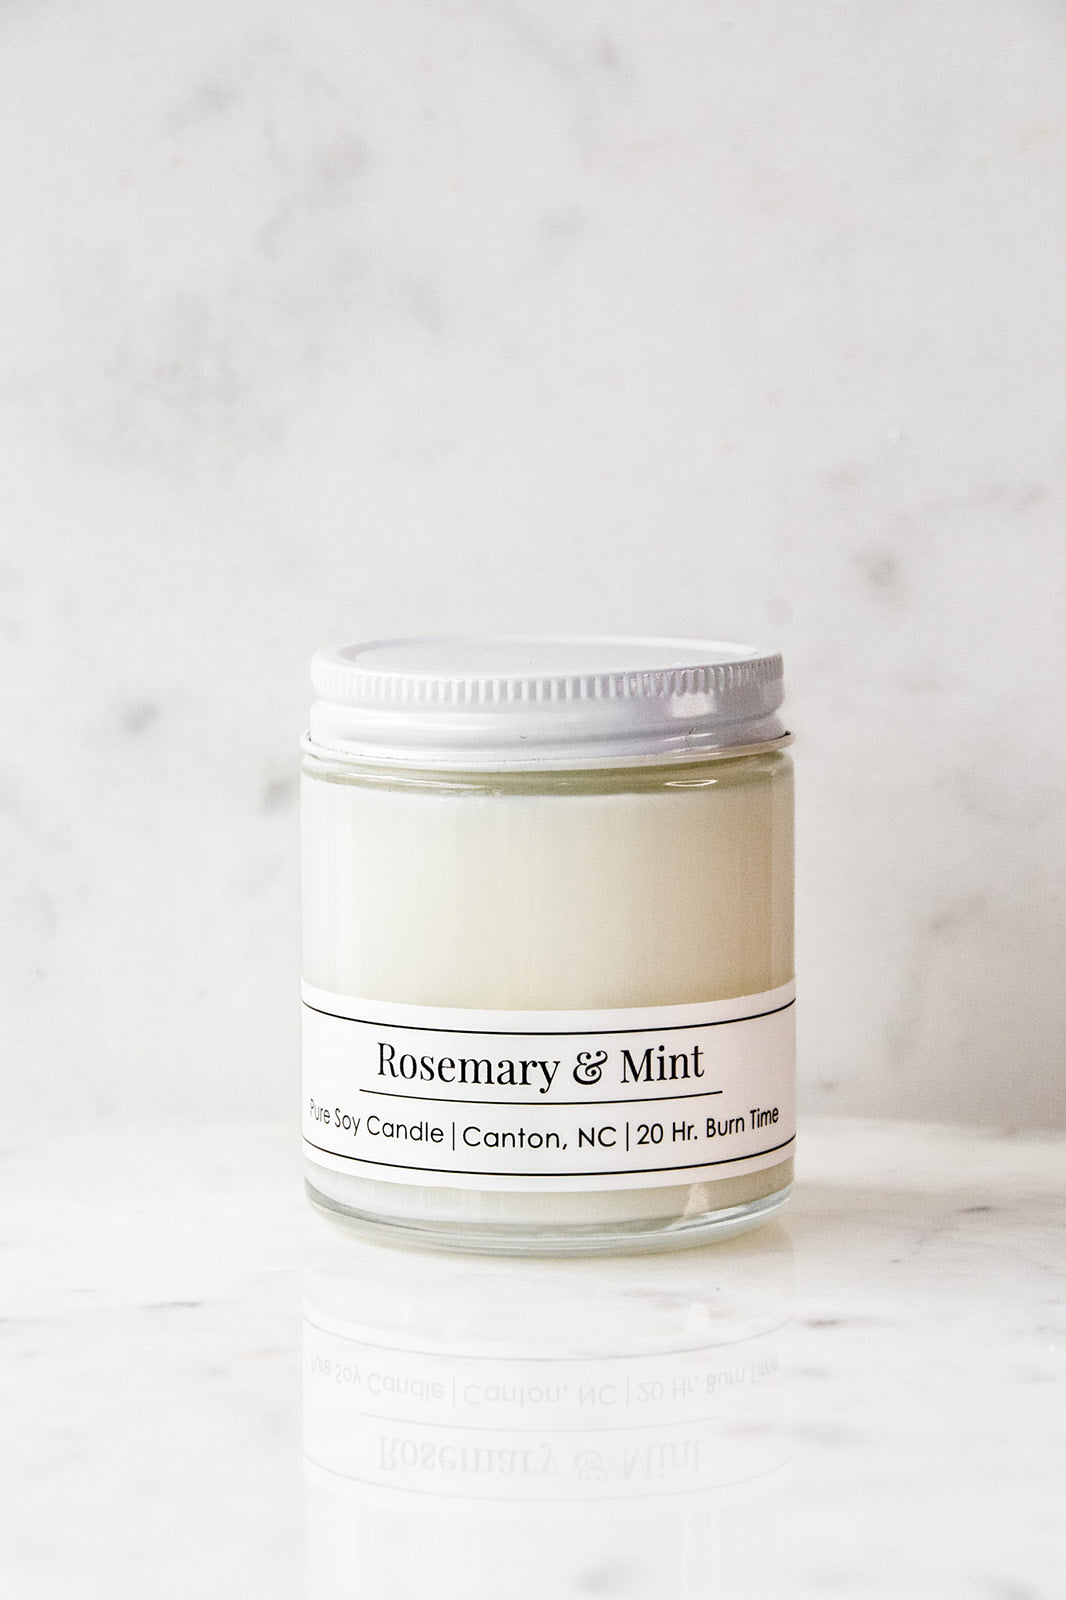 Rosemary & Mint 4 oz Candle